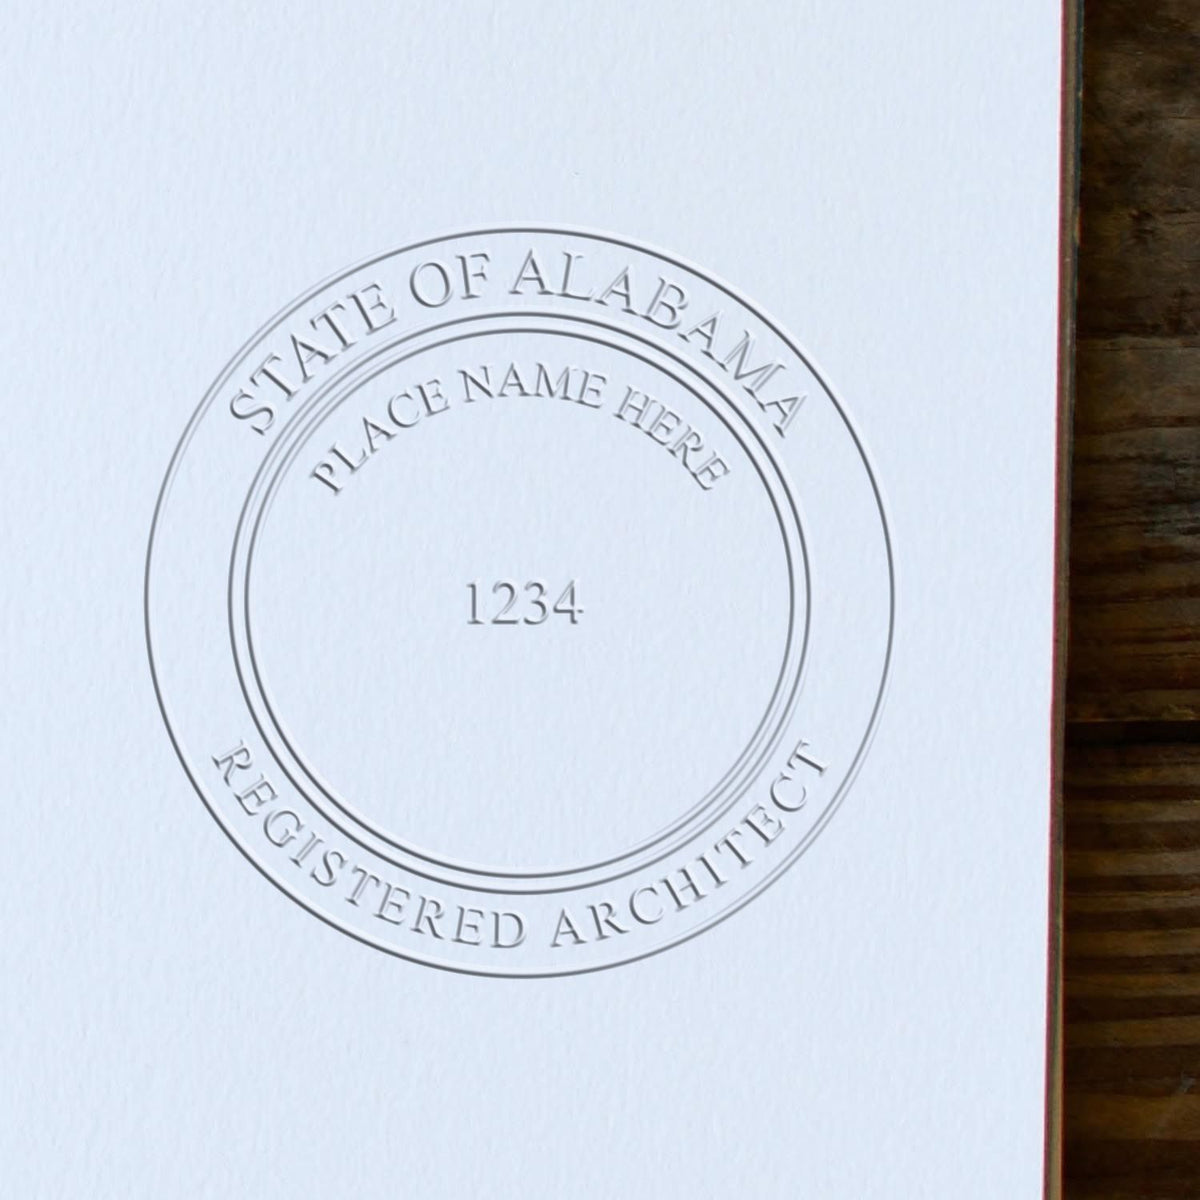 The State of Alabama Long Reach Architectural Embossing Seal stamp impression comes to life with a crisp, detailed photo on paper - showcasing true professional quality.